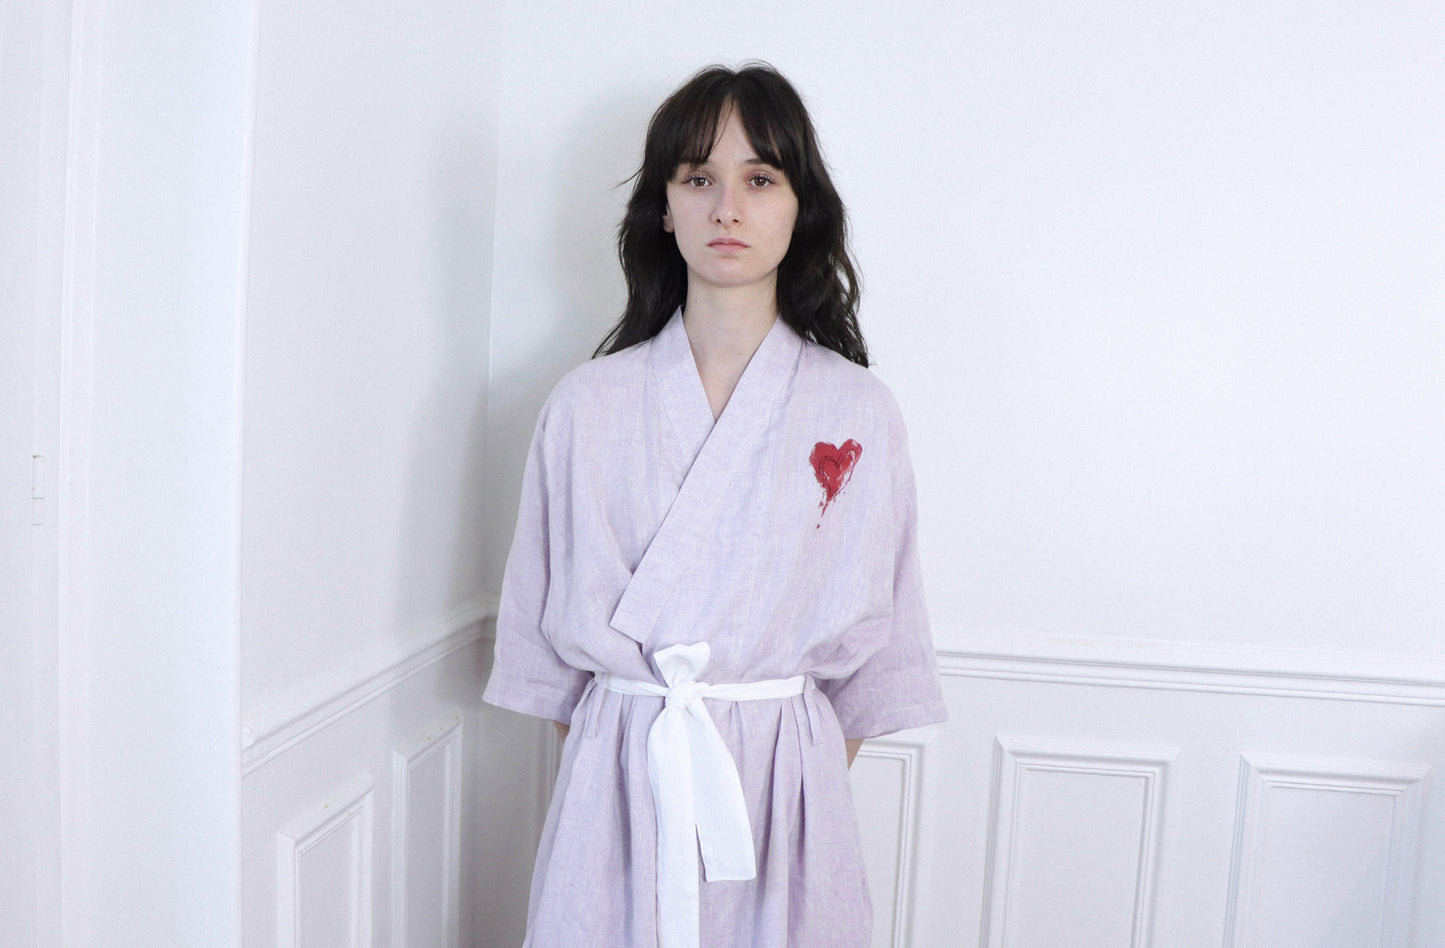 'Agathe' Linen dressing gown 'Limited hand-drawing edition'